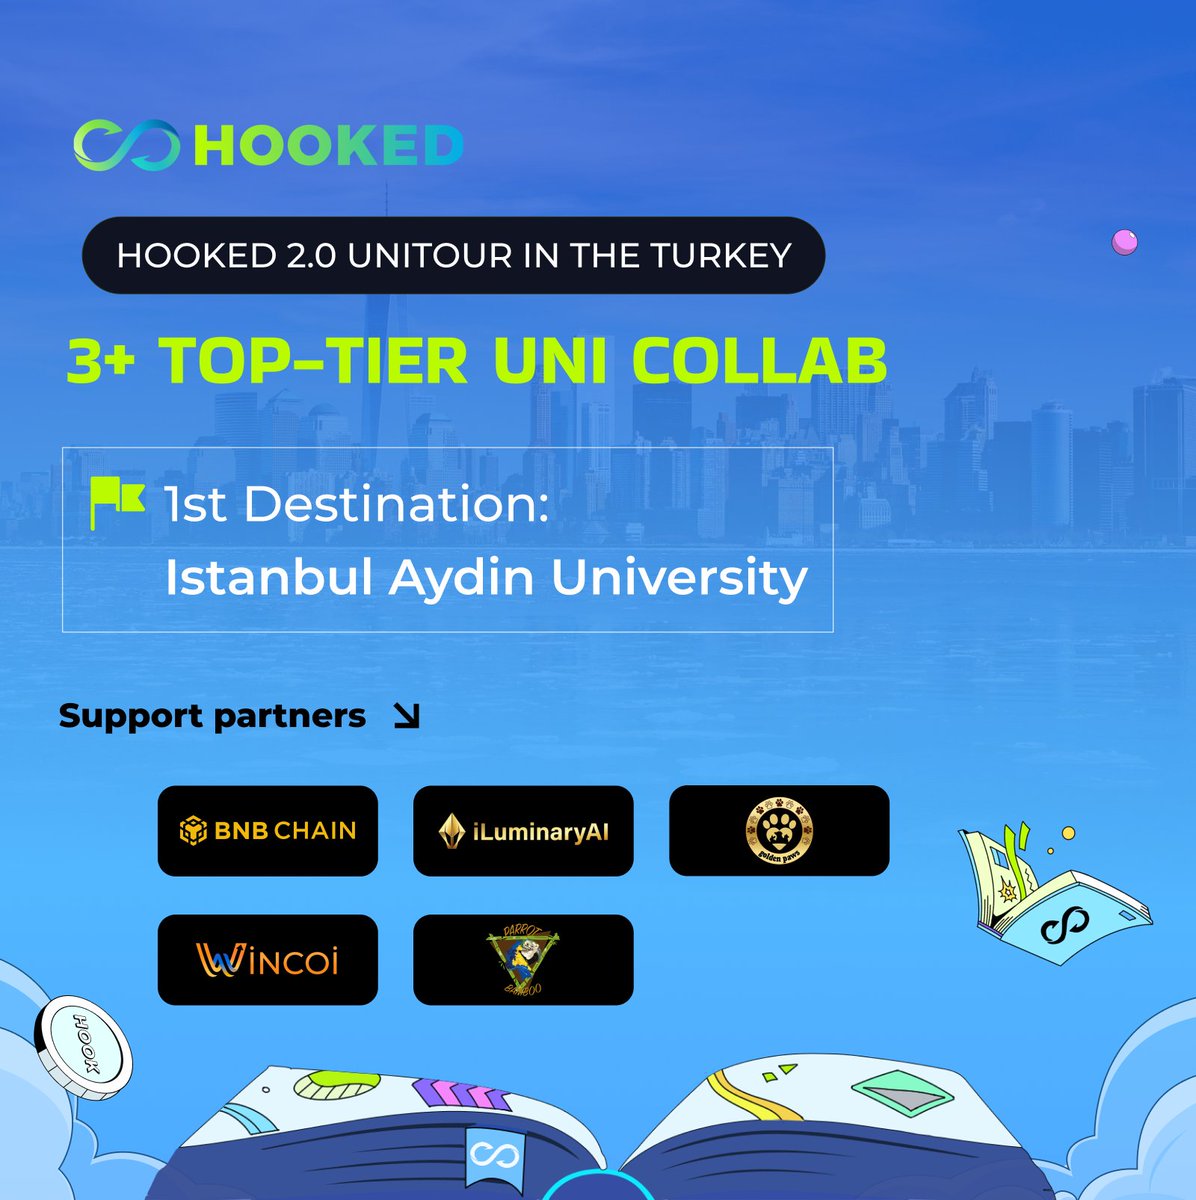 #NewEraofHOOKED #HookedUnitour 🌟Thrilled to start our Turkey UniTour at Istanbul Aydin University, a hub for Web3 innovation! 🔥Dedicated to nurturing Web3 advancements, Istanbul Aydin University offers student entrepreneurial resources through its Silicon Valley office.